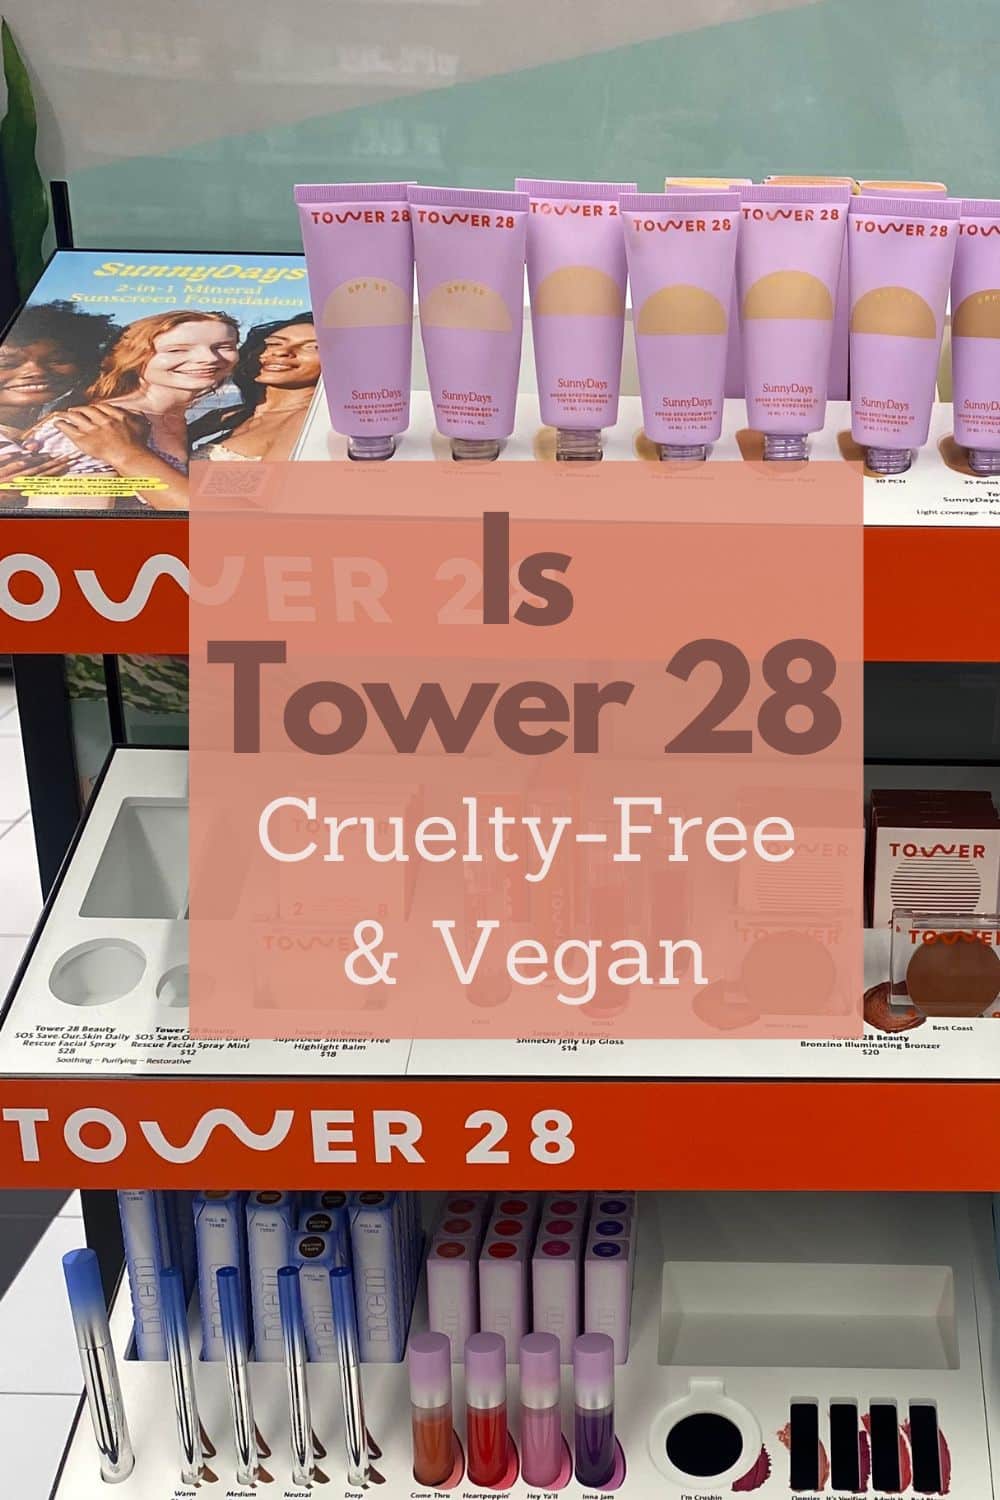 Is Tower 28 Vegan and Cruelty-Free?